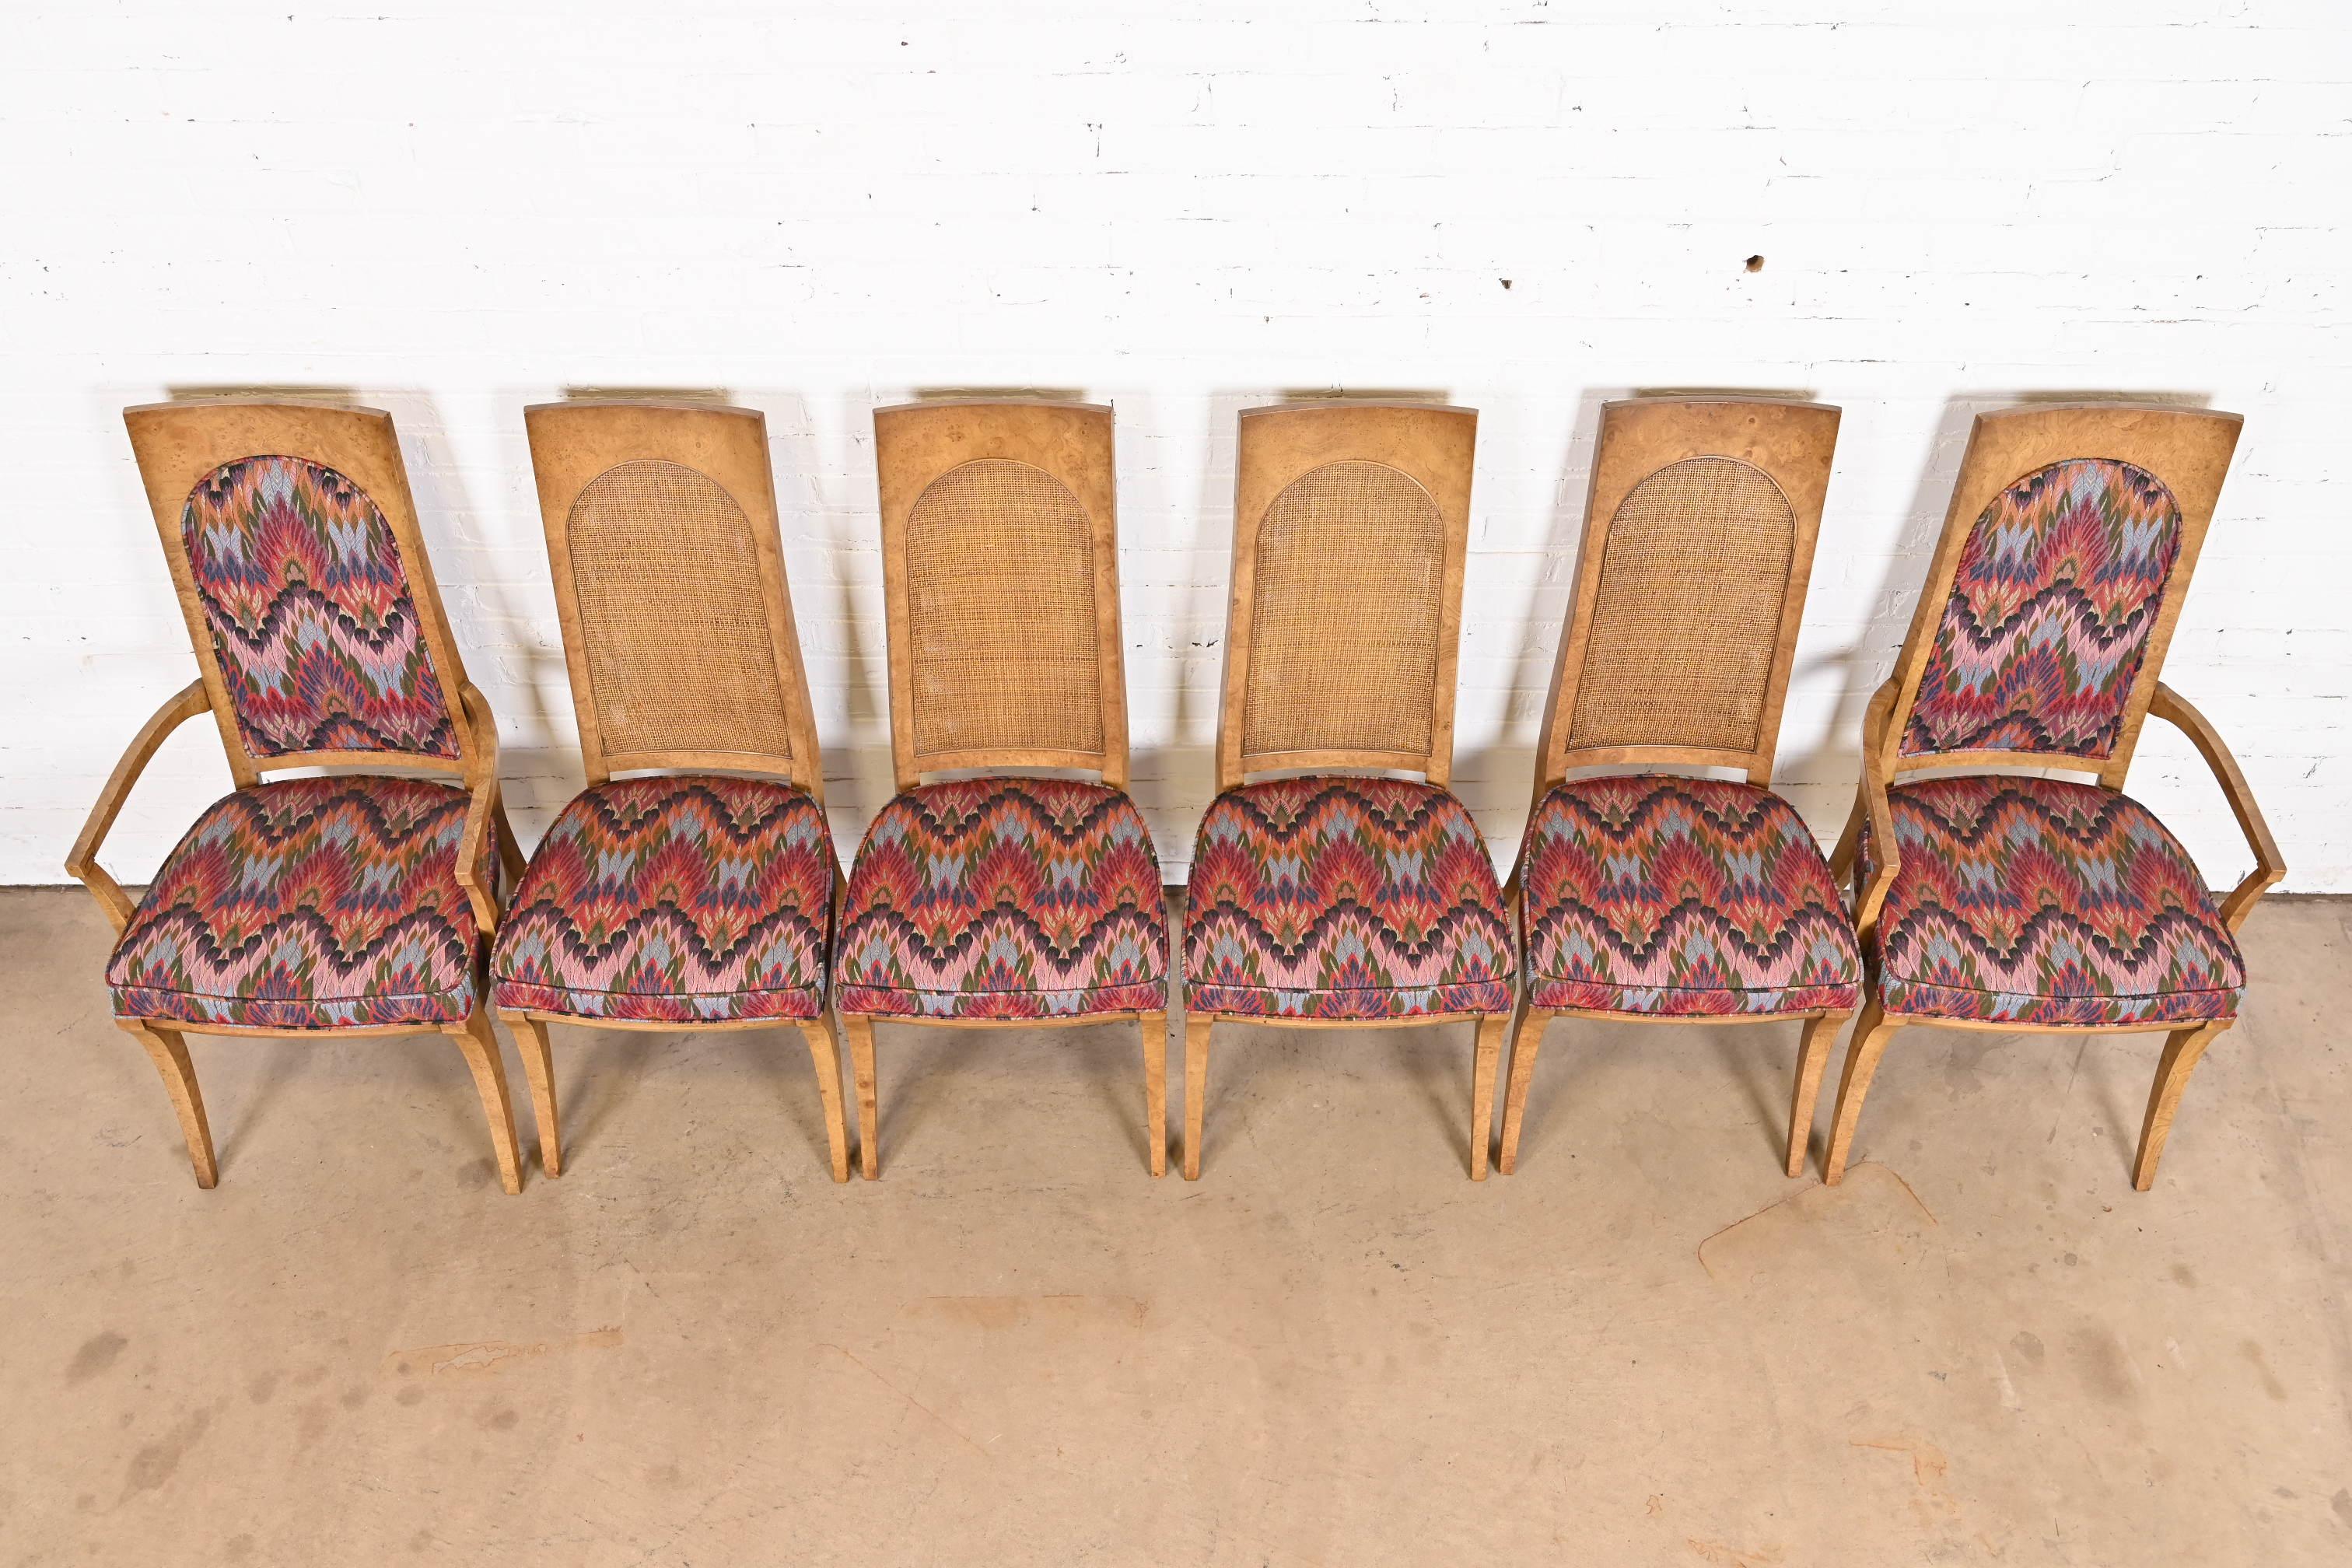 Upholstery Karges Hollywood Regency Burl Wood, Cane, and Upholstered Dining Chairs, Six